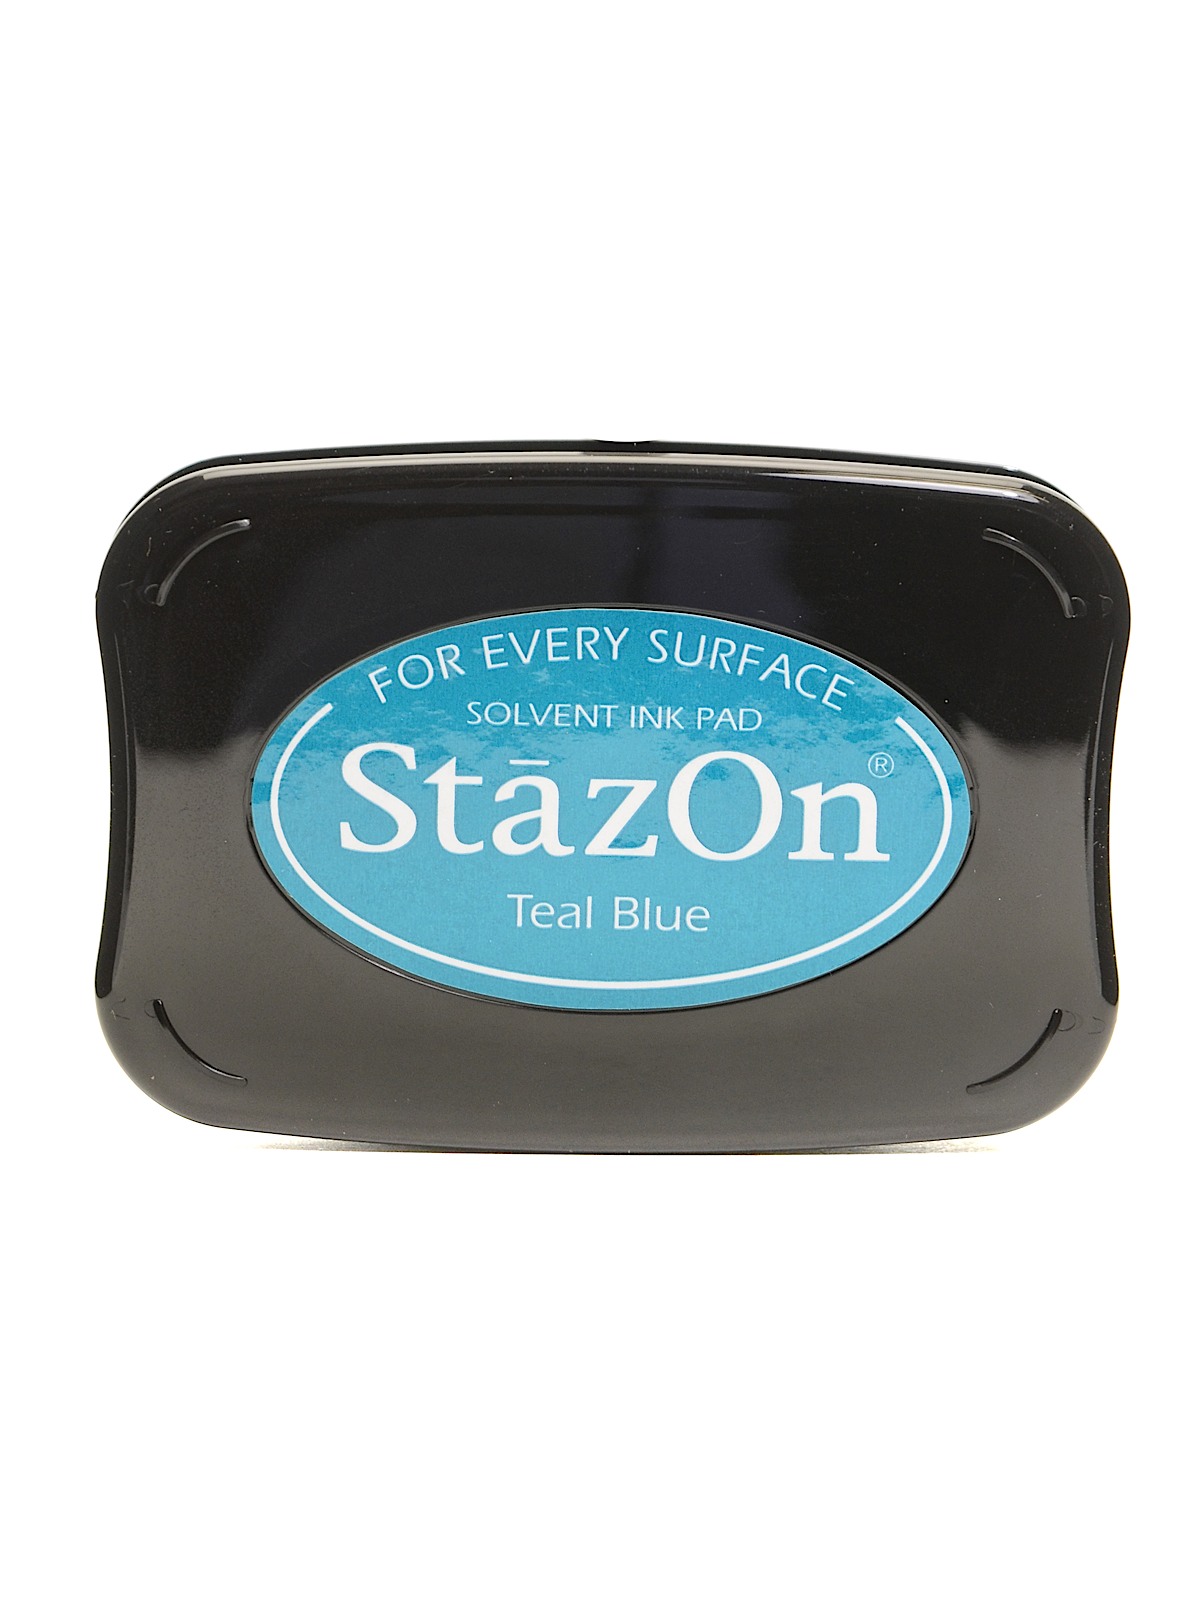 Stazon Solvent Ink Teal Blue 3.75 In. X 2.625 In. Full-size Pad